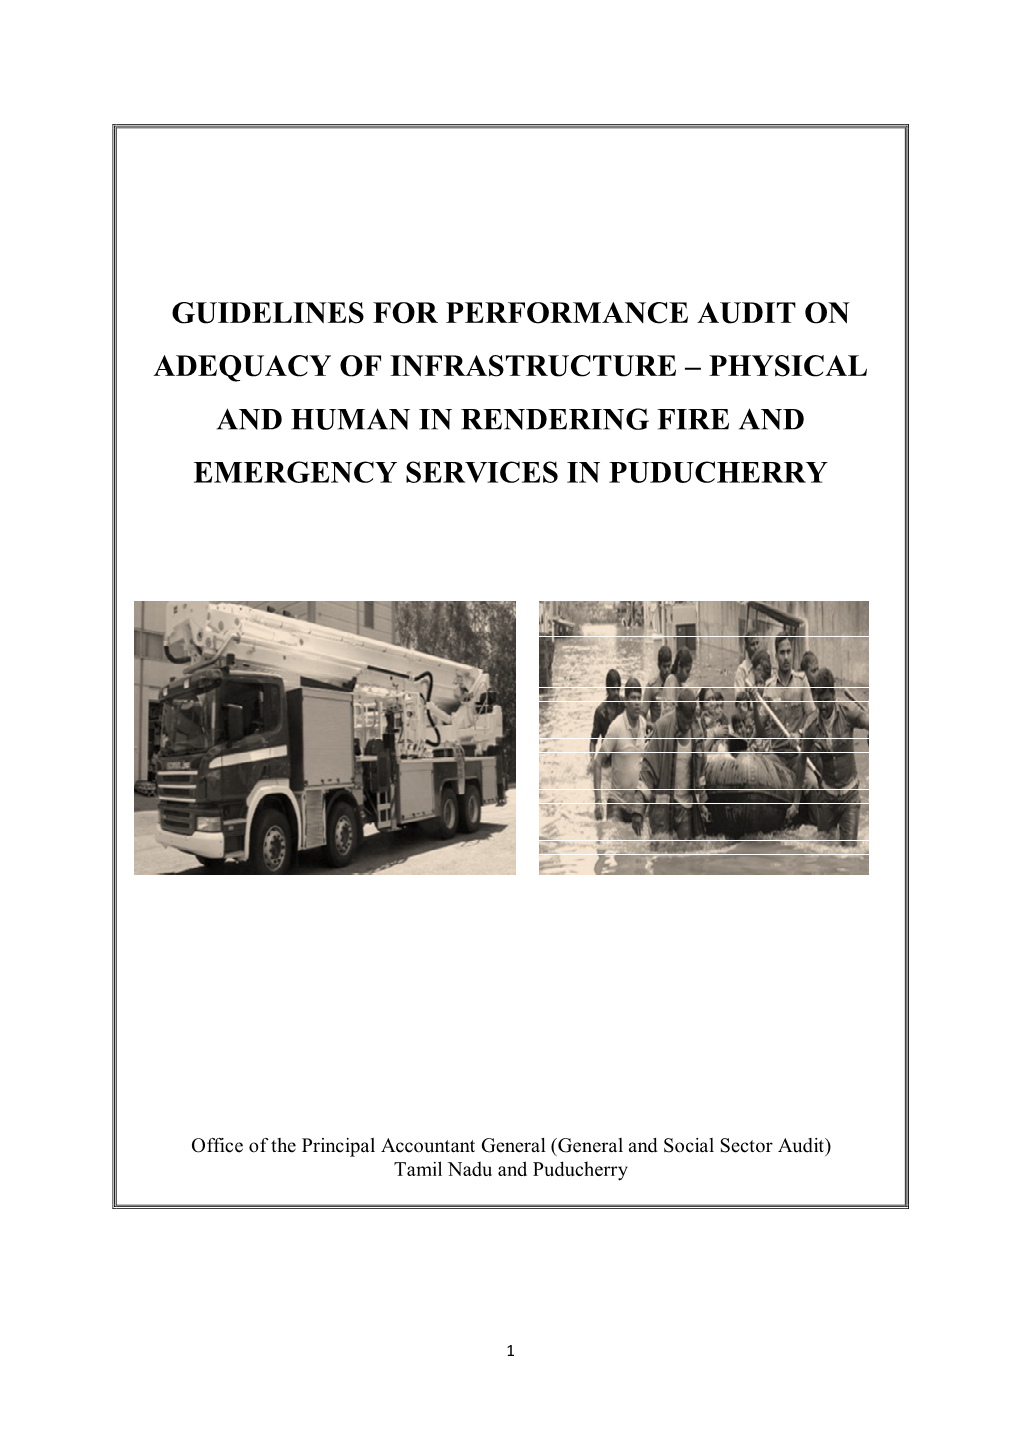 Guidelines for Performance Audit on Adequacy of Infrastructure – Physical and Human in Rendering Fire and Emergency Services in Puducherry